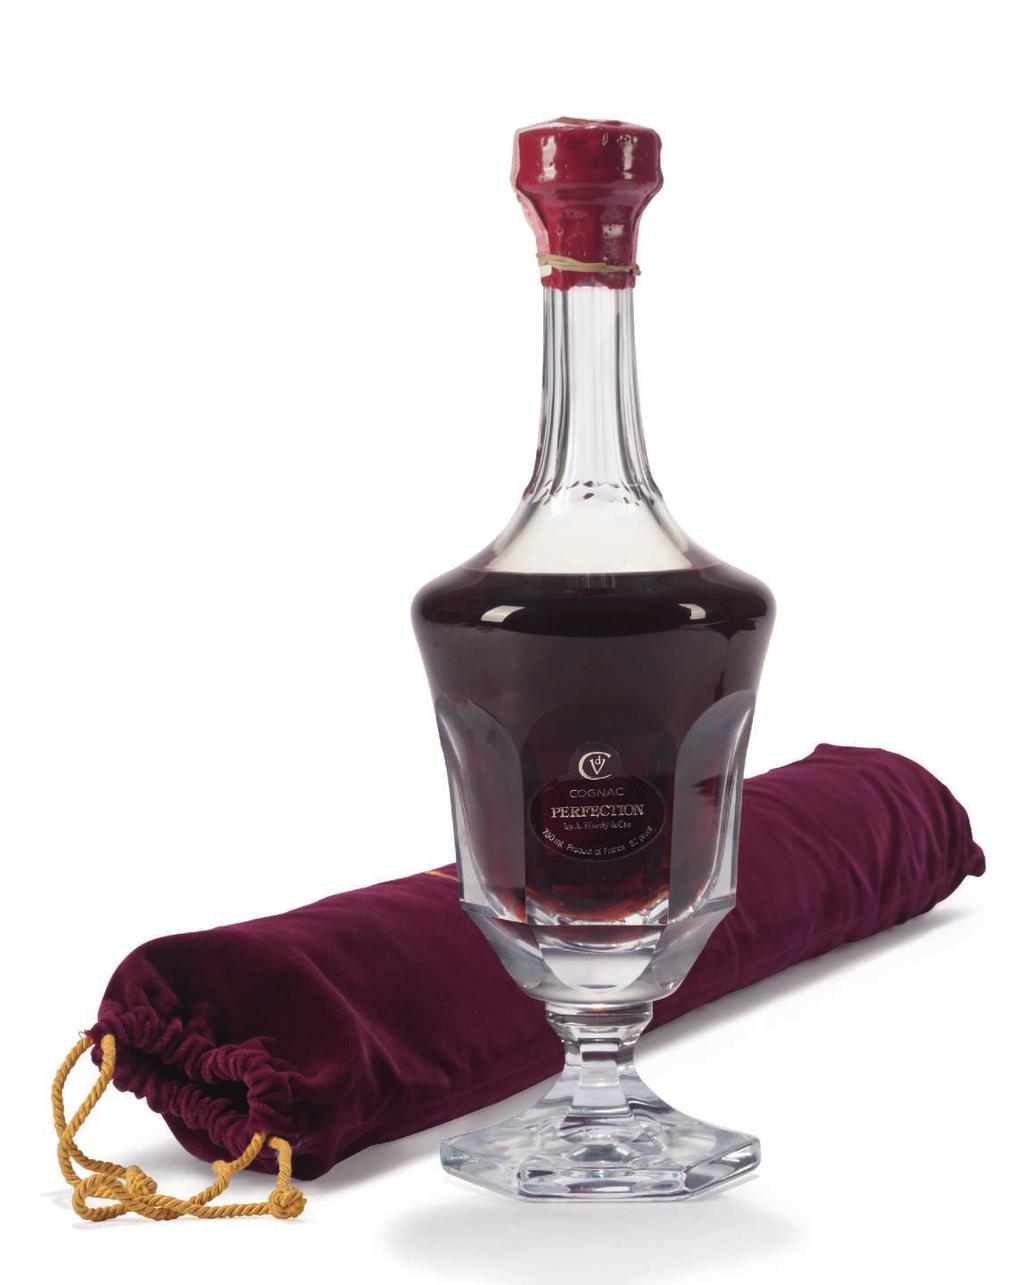 PERFECTION 67 Hardy Perfection Cognac Bottle 514 of 1200, includes Daum crystal decanter, lithograph print and crystal stopper In presentation case 1